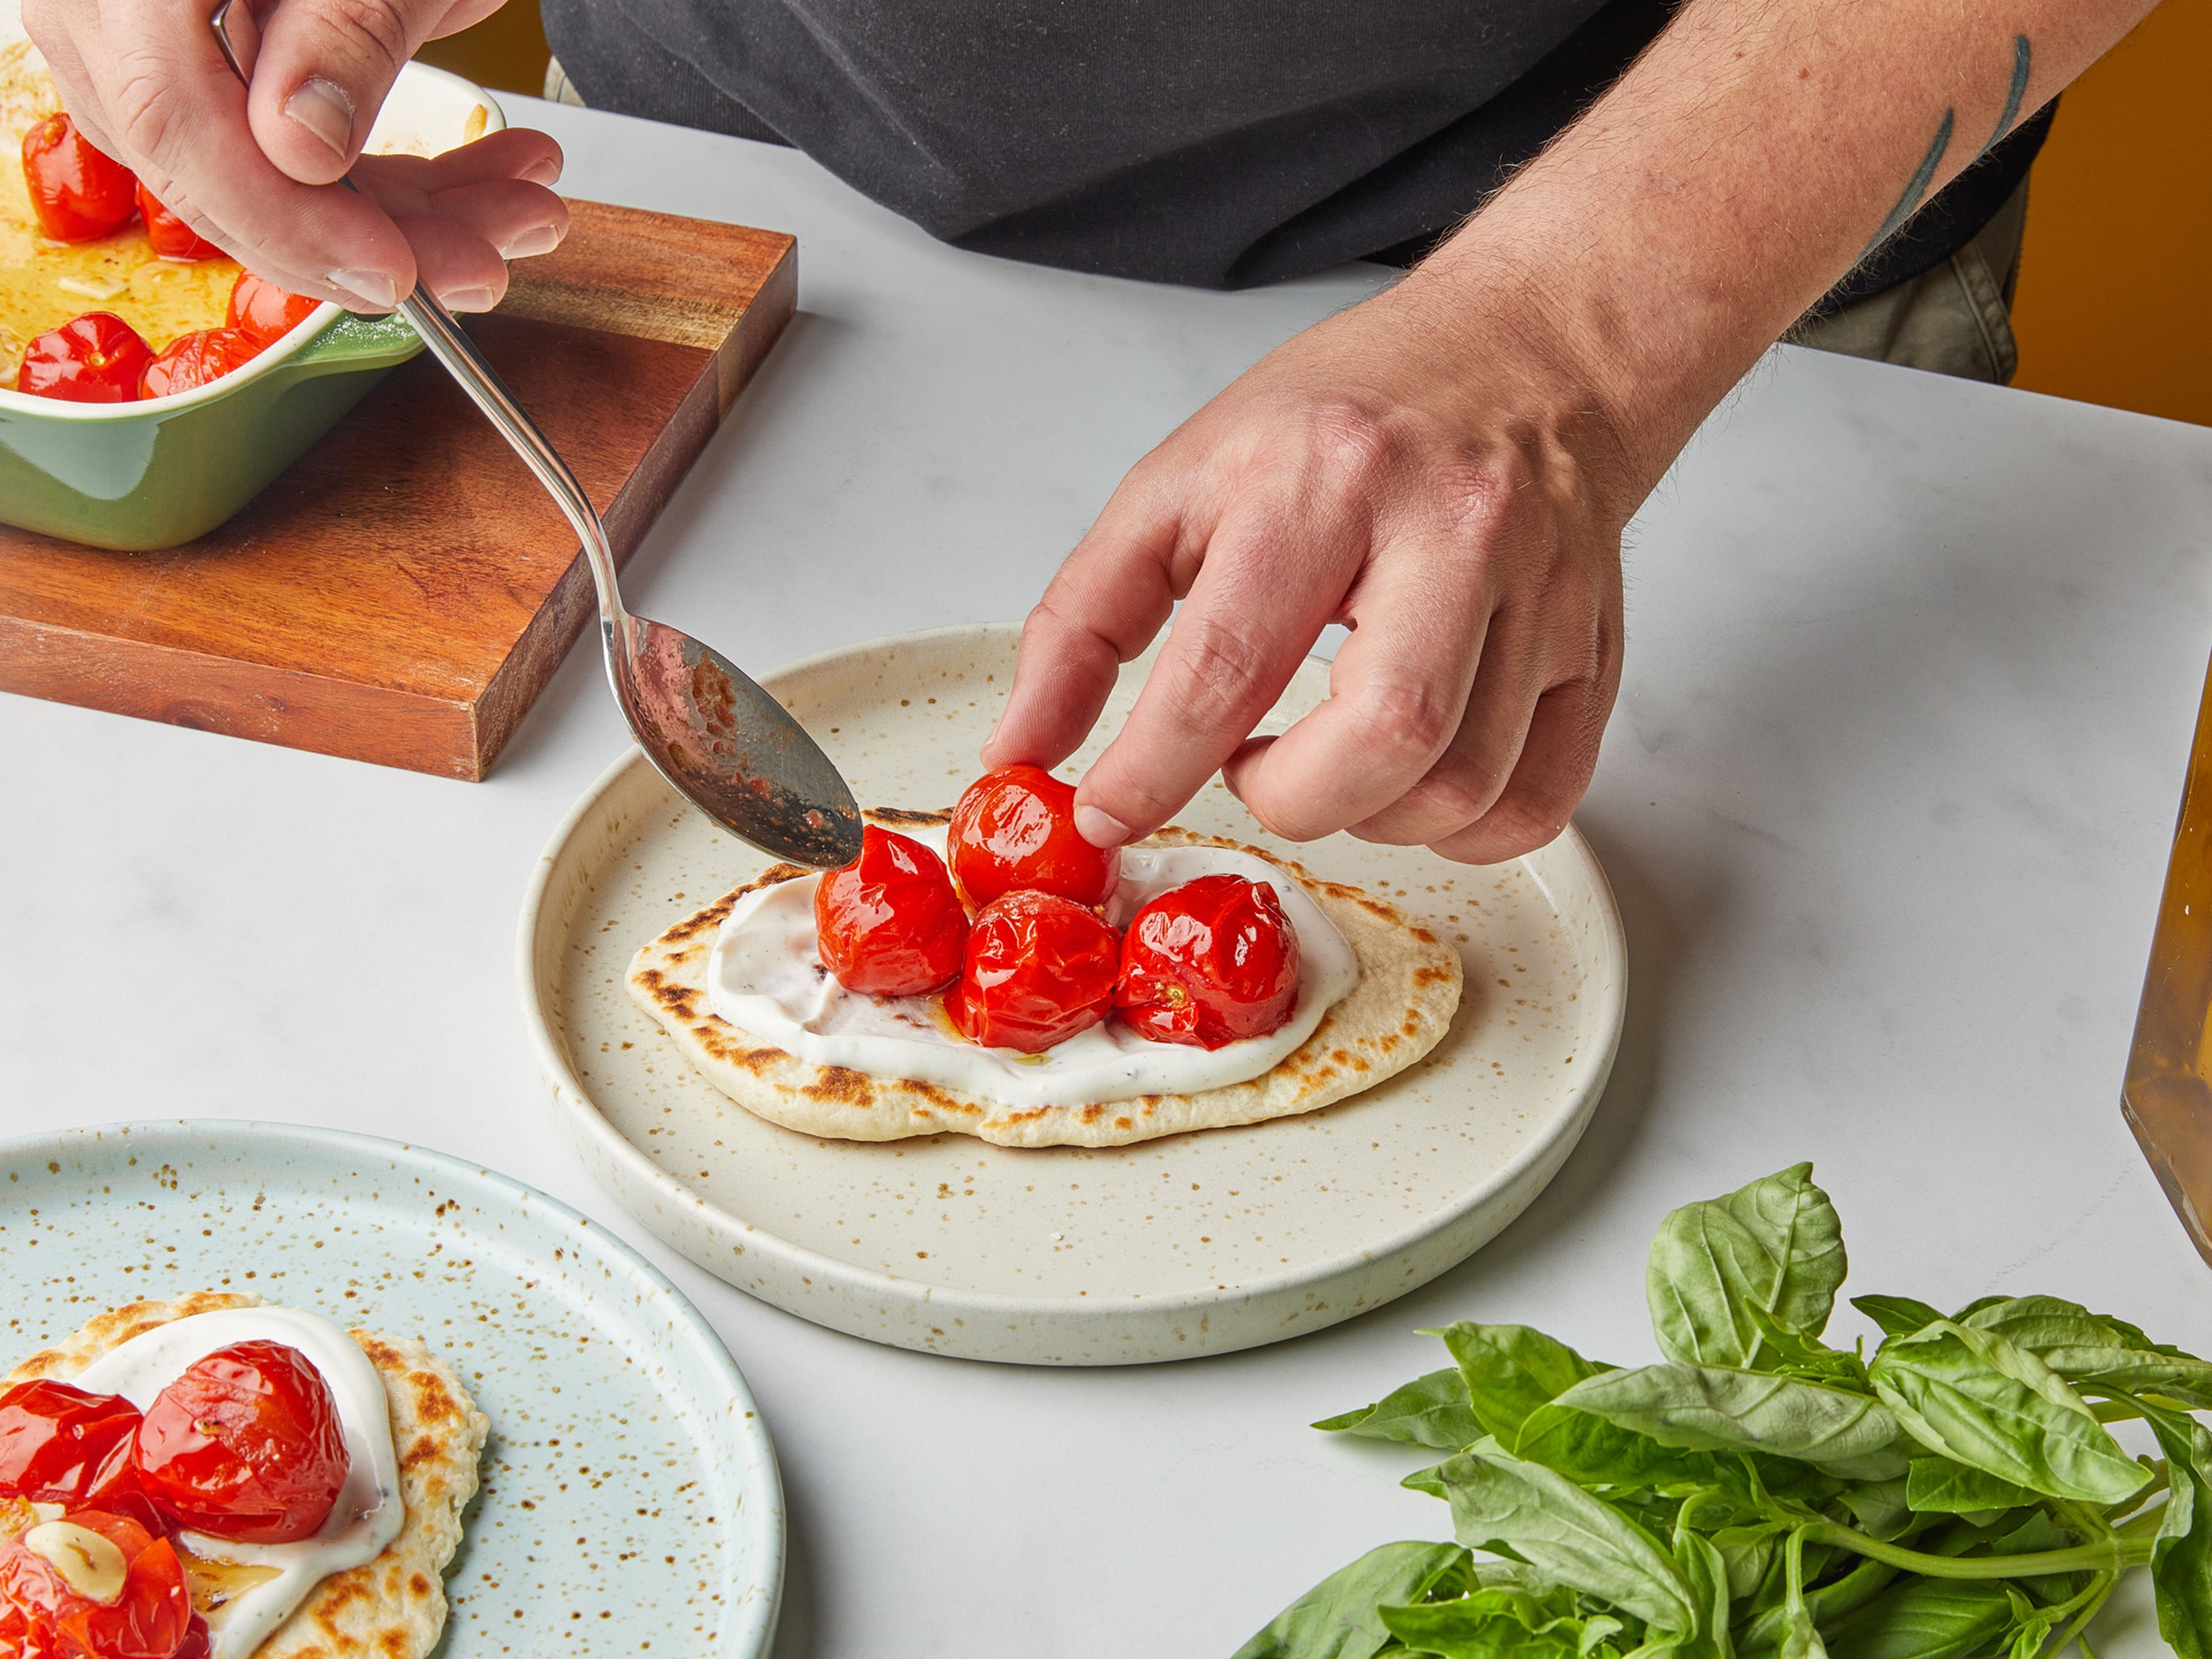 Season the remaining yogurt with salt and pepper, then spread the yogurt over the flatbreads. Next, put the cherry tomatoes and fresh basil leaves on the breads, and sprinkle with sea salt. Serve immediately and enjoy!